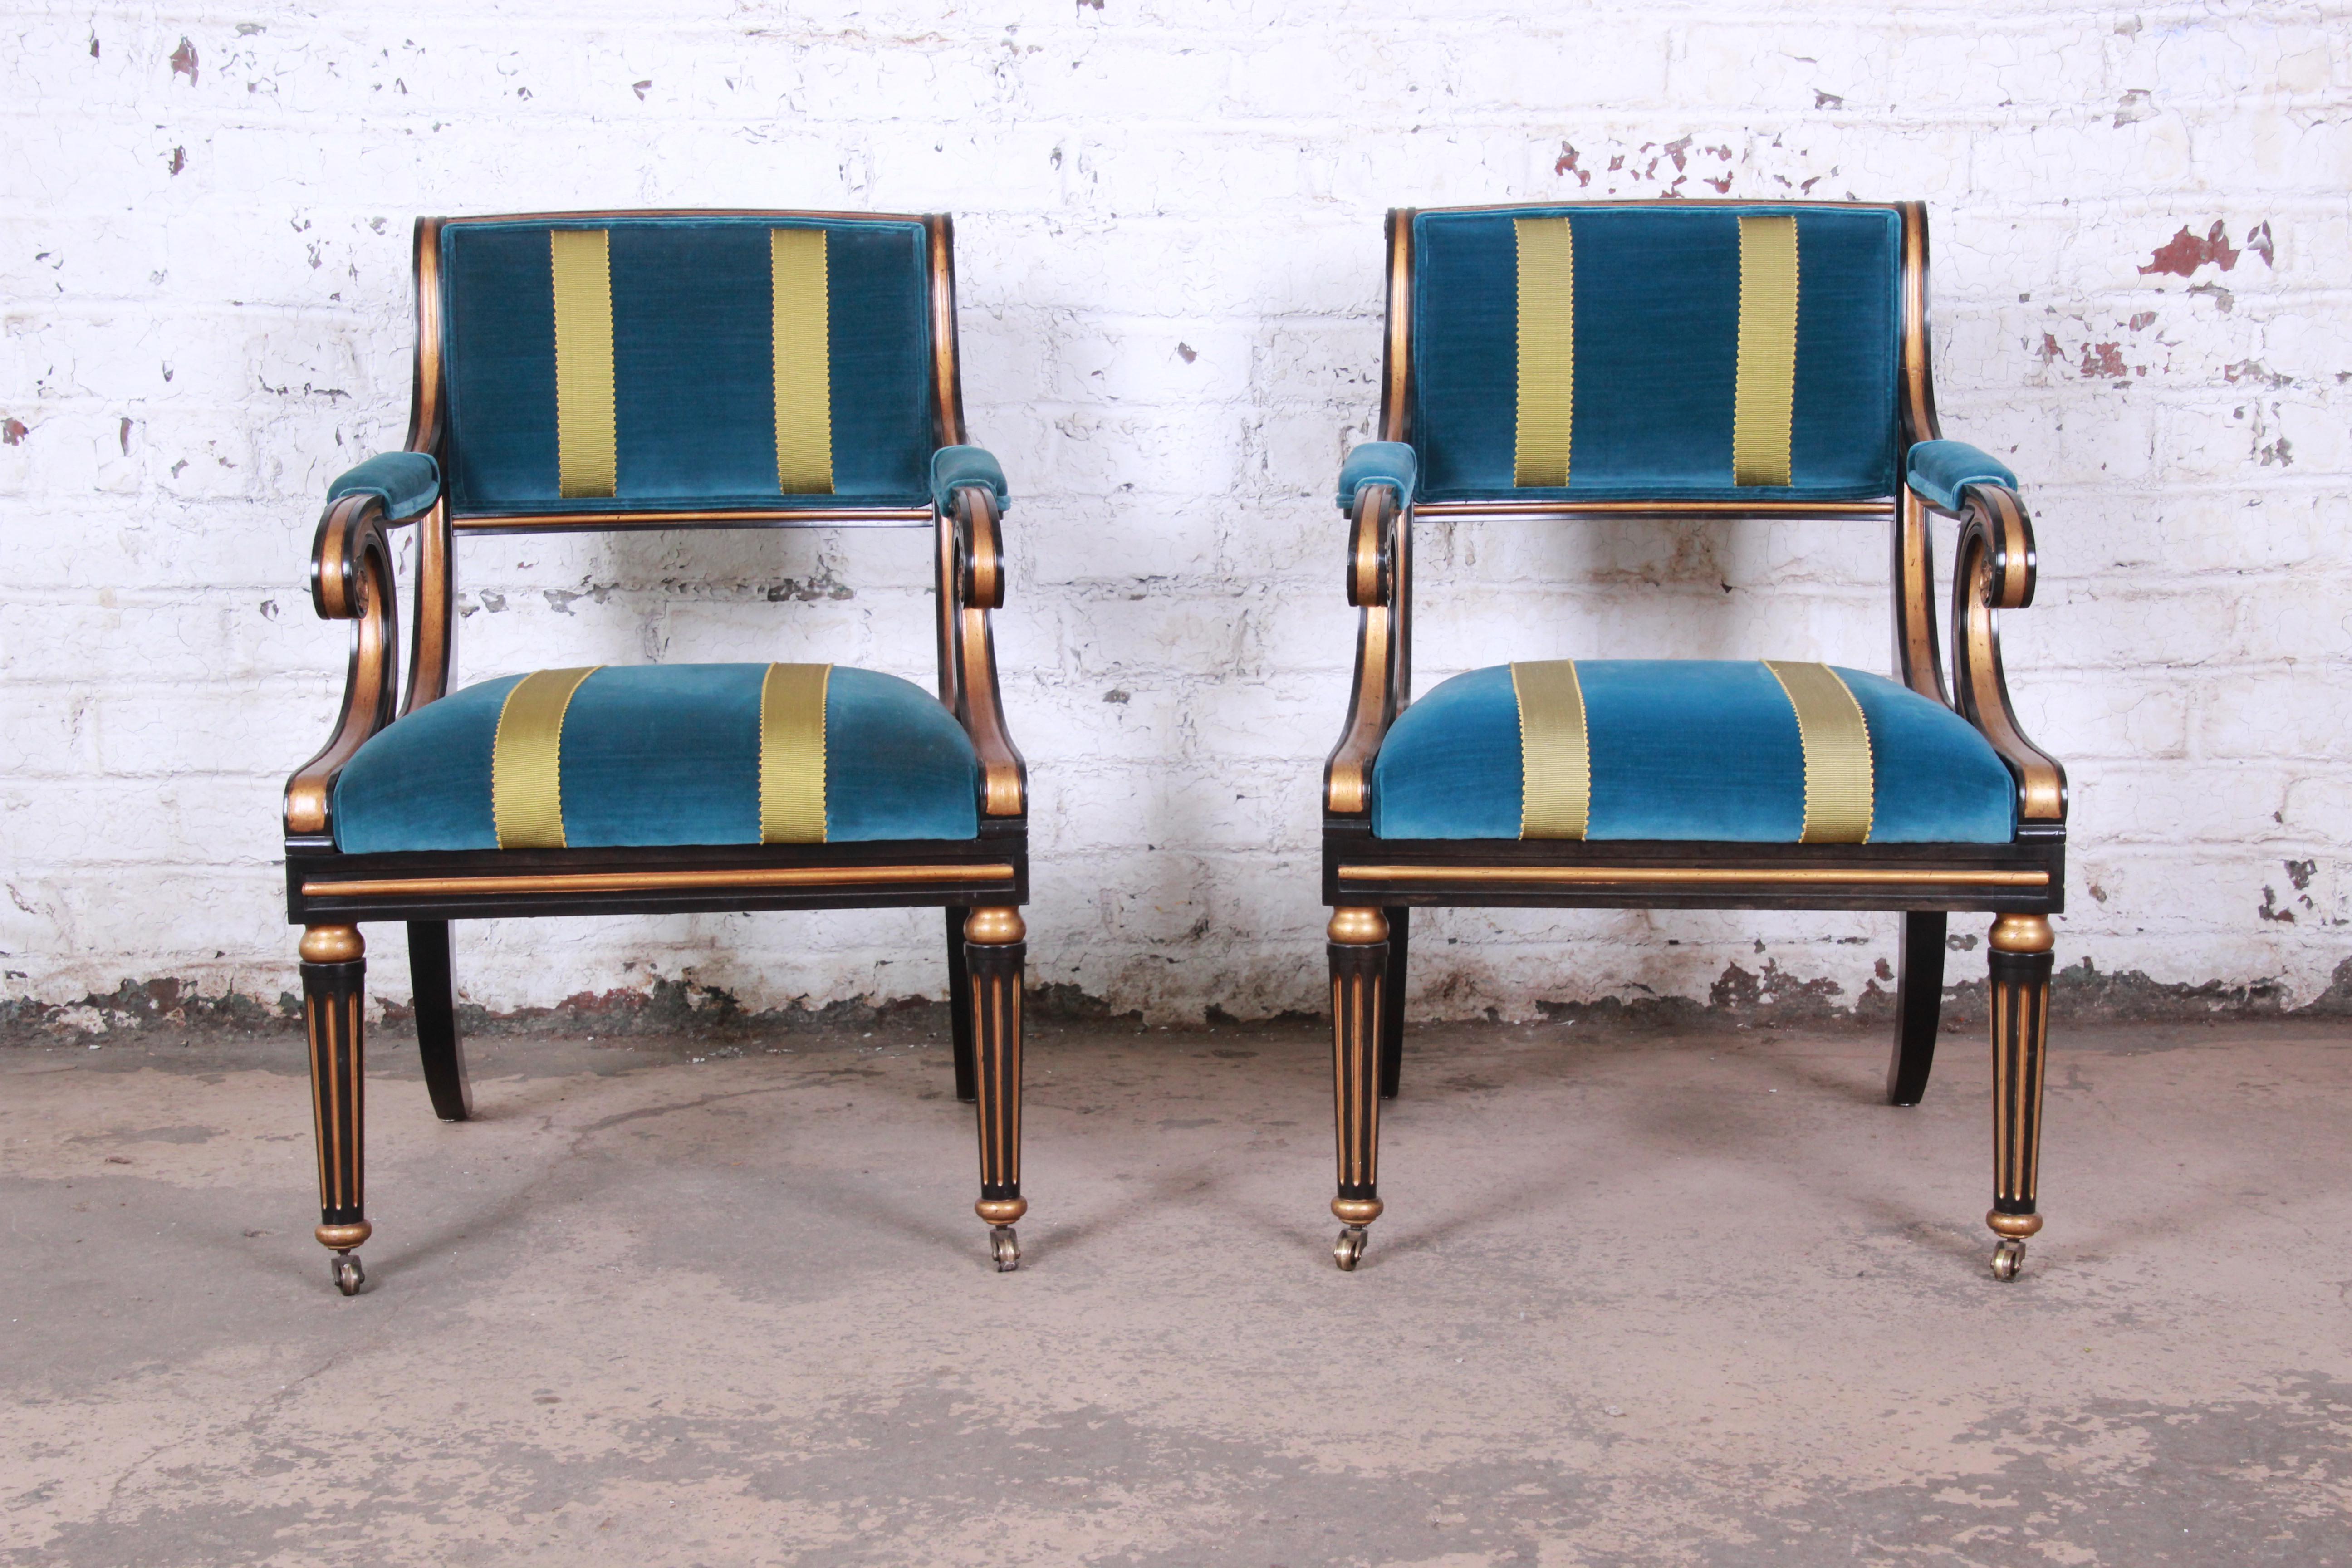 An exceptional pair of Regency style armchairs by Baker Furniture. The chairs feature stunning ebonized and gold gilt solid wood frames and teal mohair velvet upholstery with gold stripes. Made with the highest quality craftsmanship, as expected